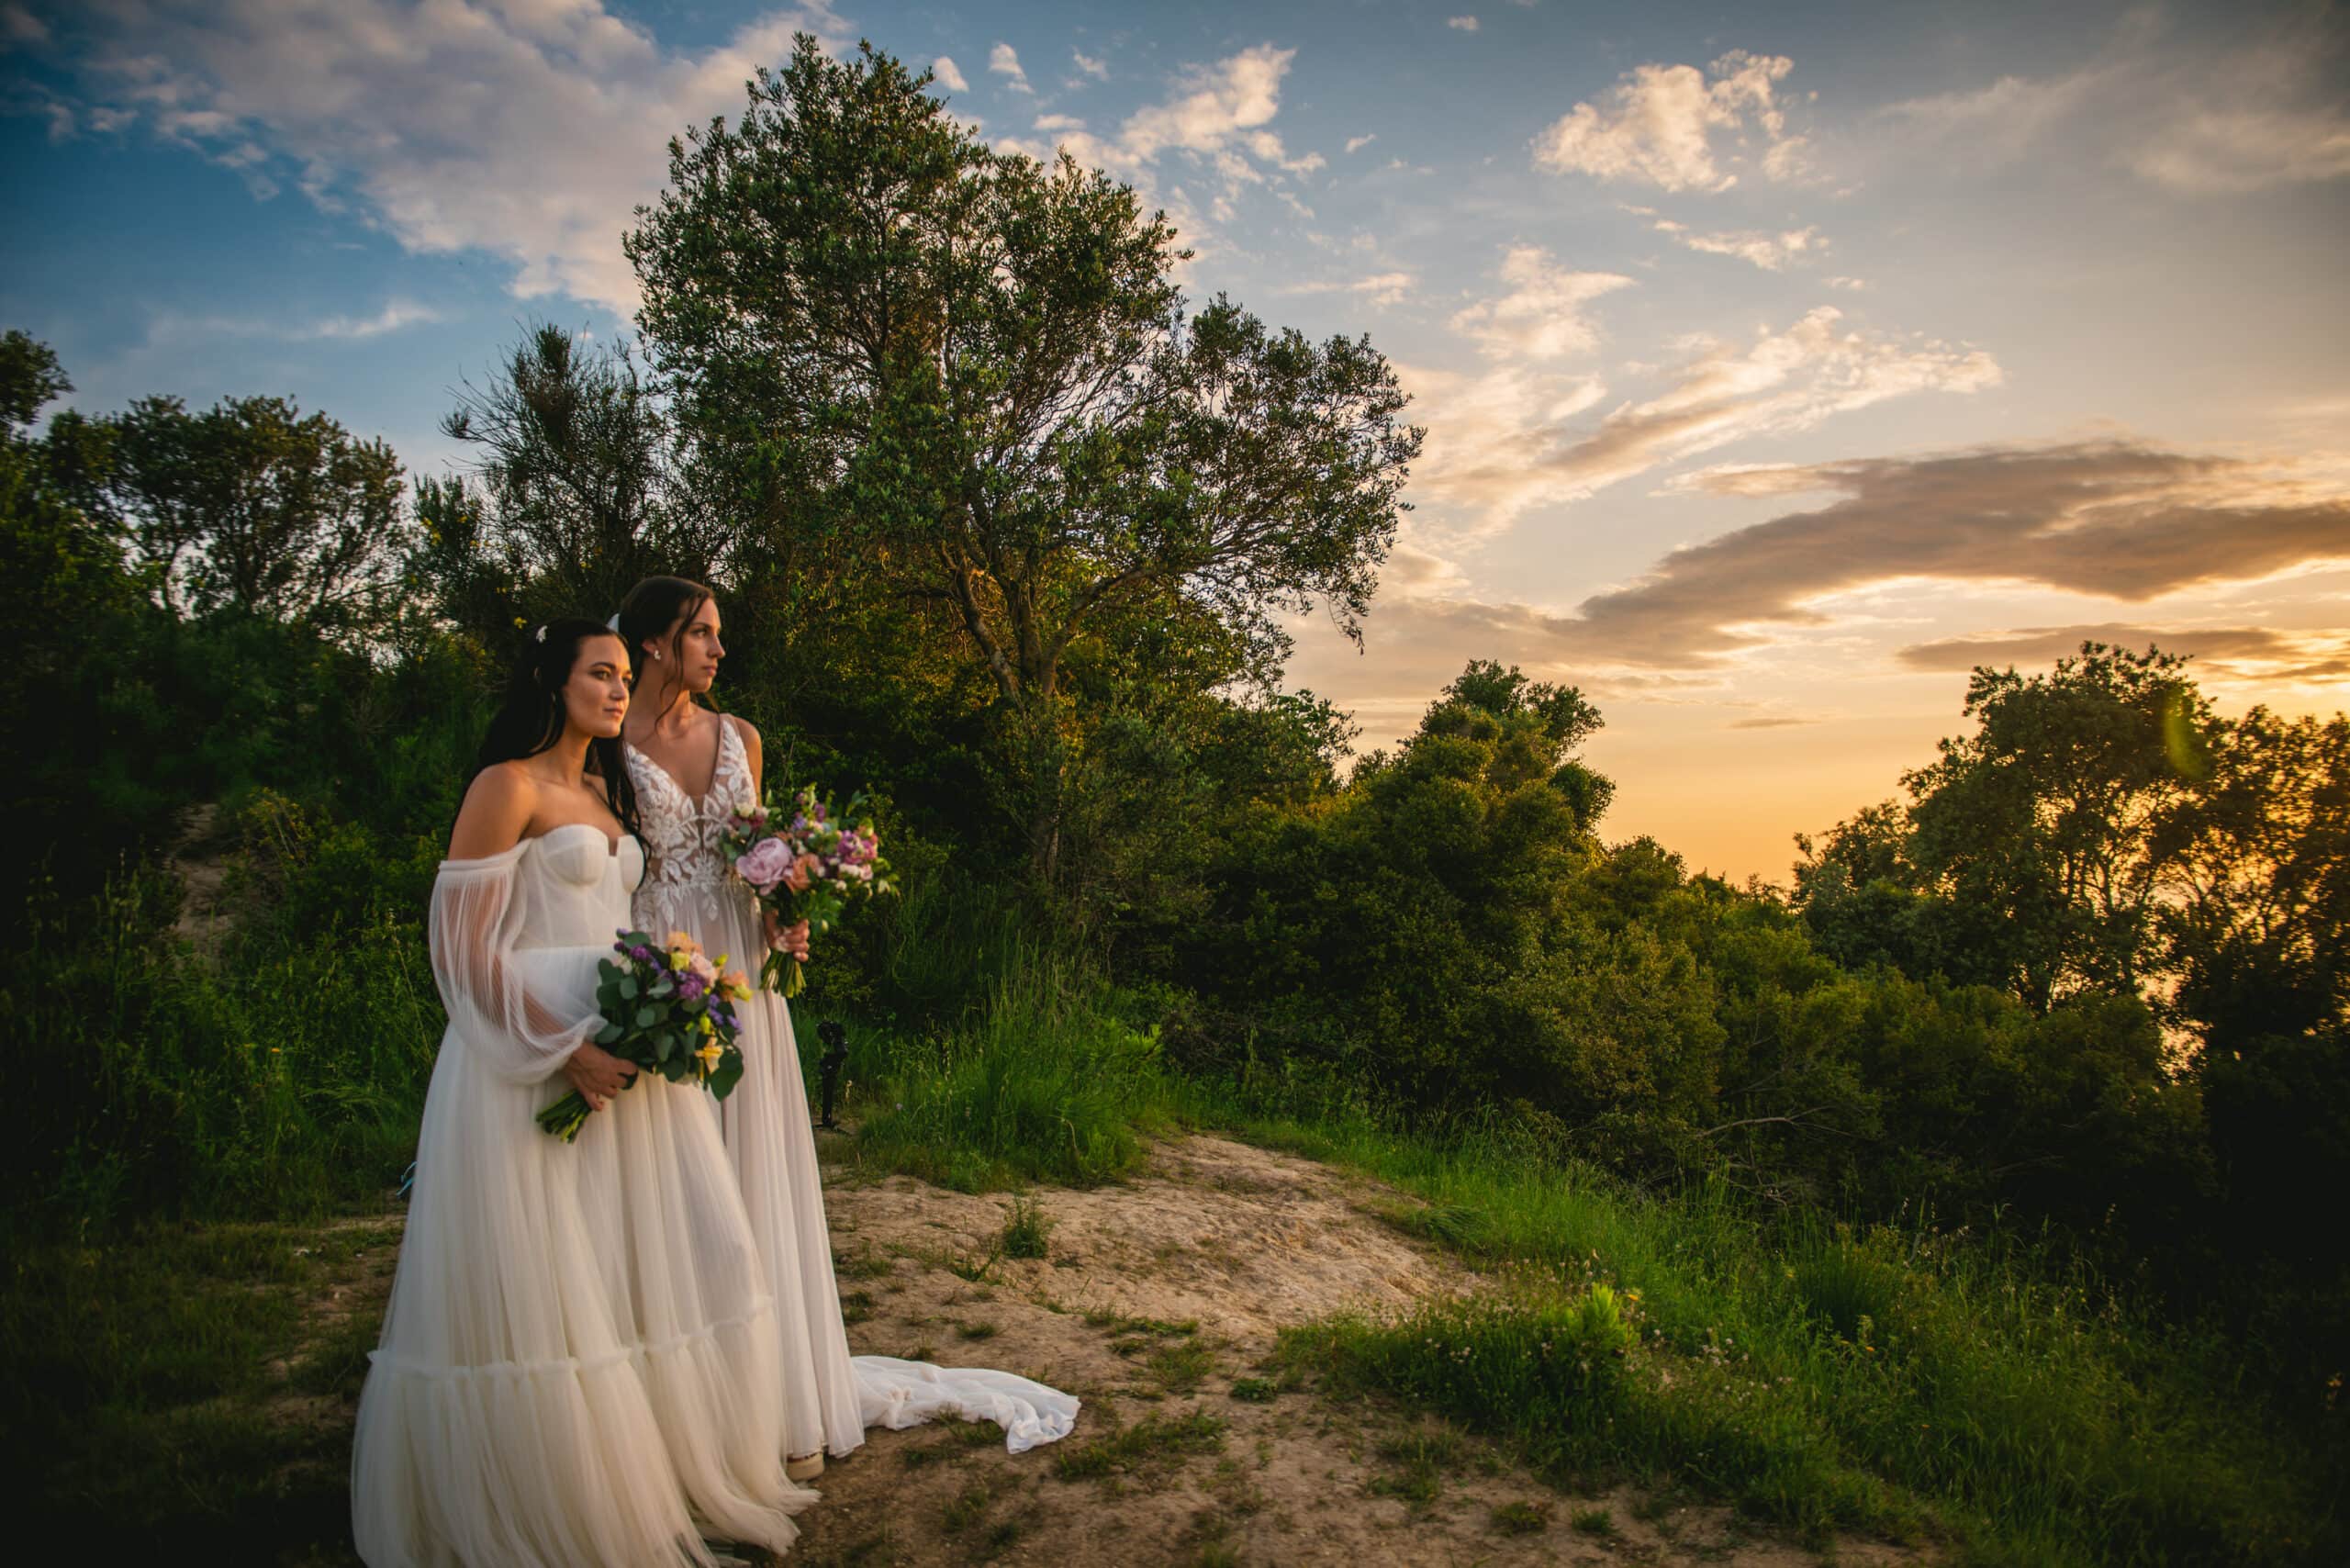 Brides gazing at the sea during sunset, dreamy moments of their Corfu elopement.